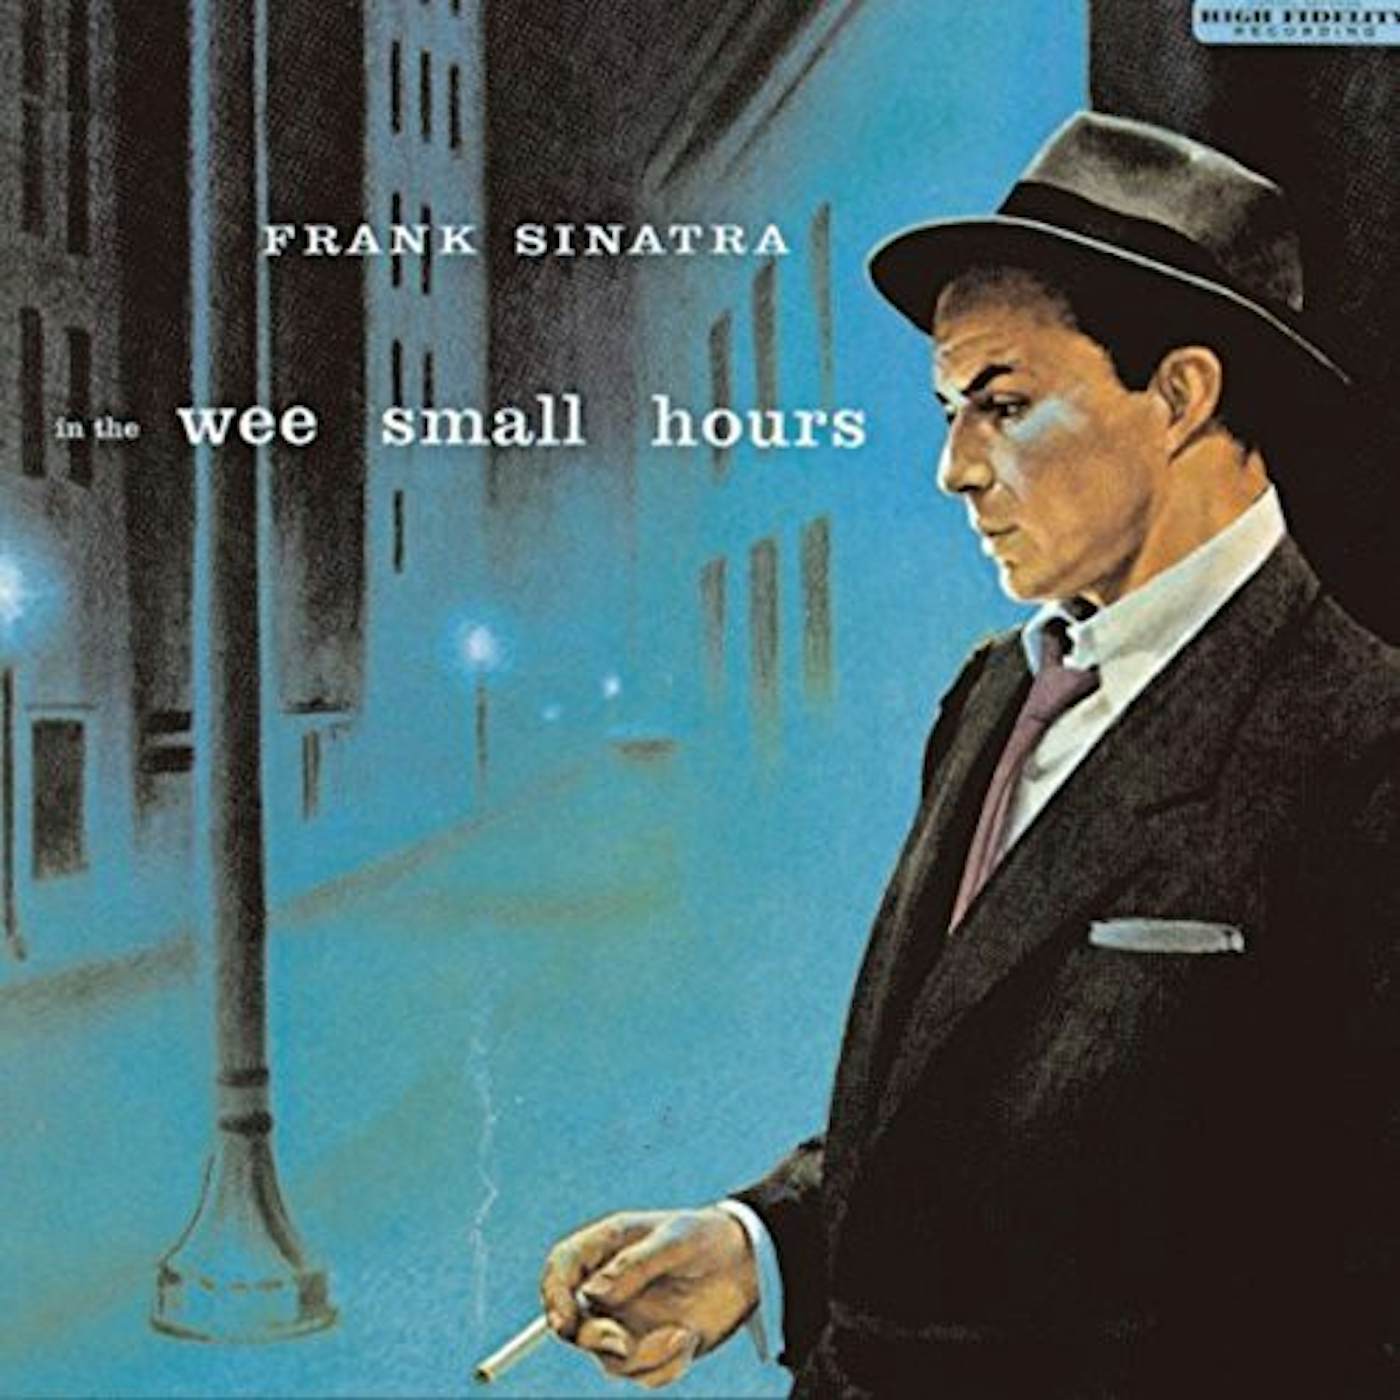 Frank Sinatra In The Wee Small Hours (Marbled) Vinyl Record